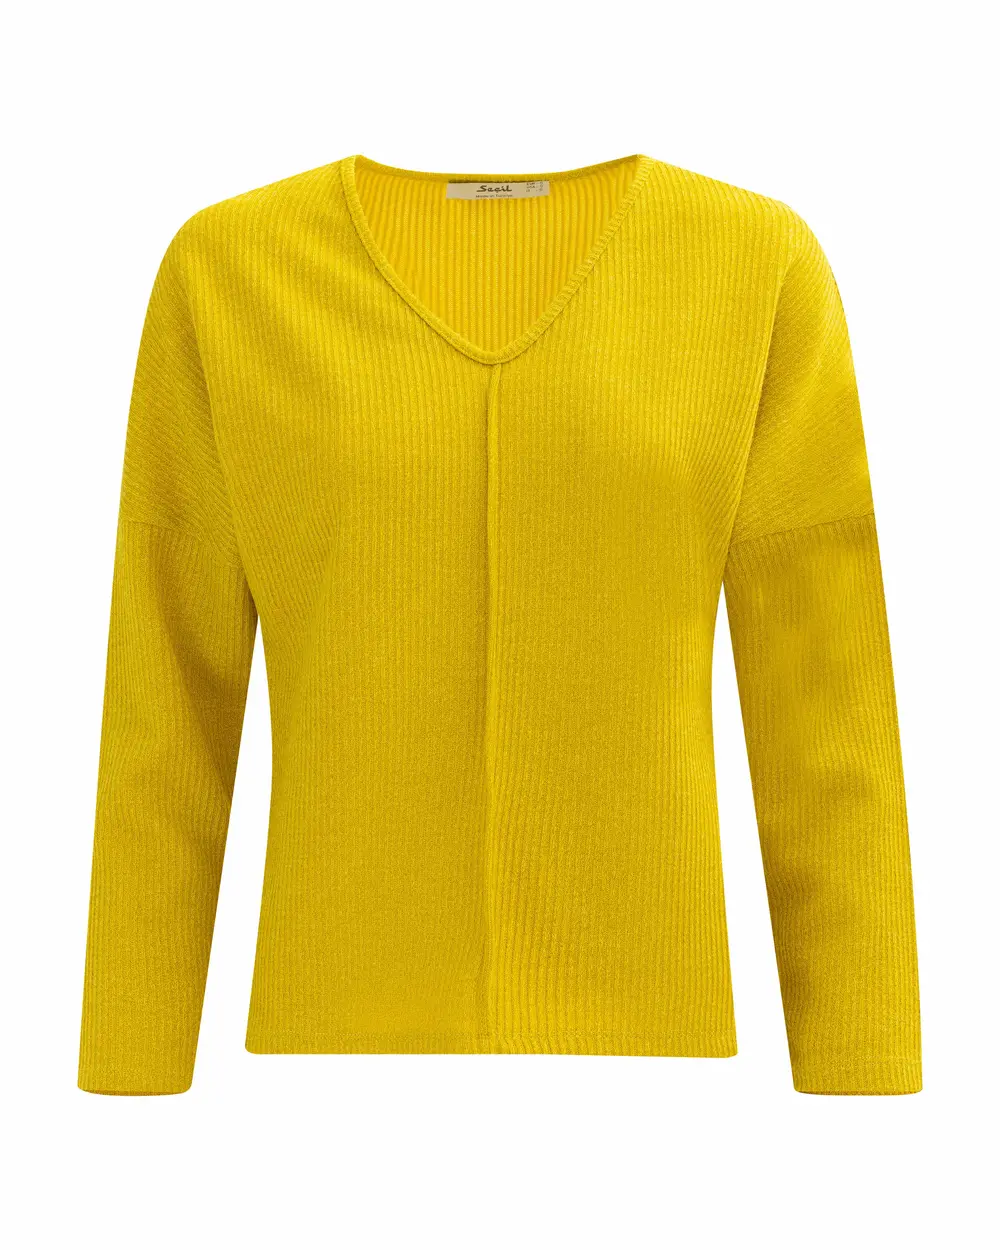 Knitted Fabric V-Neck Long Sleeve Blouse